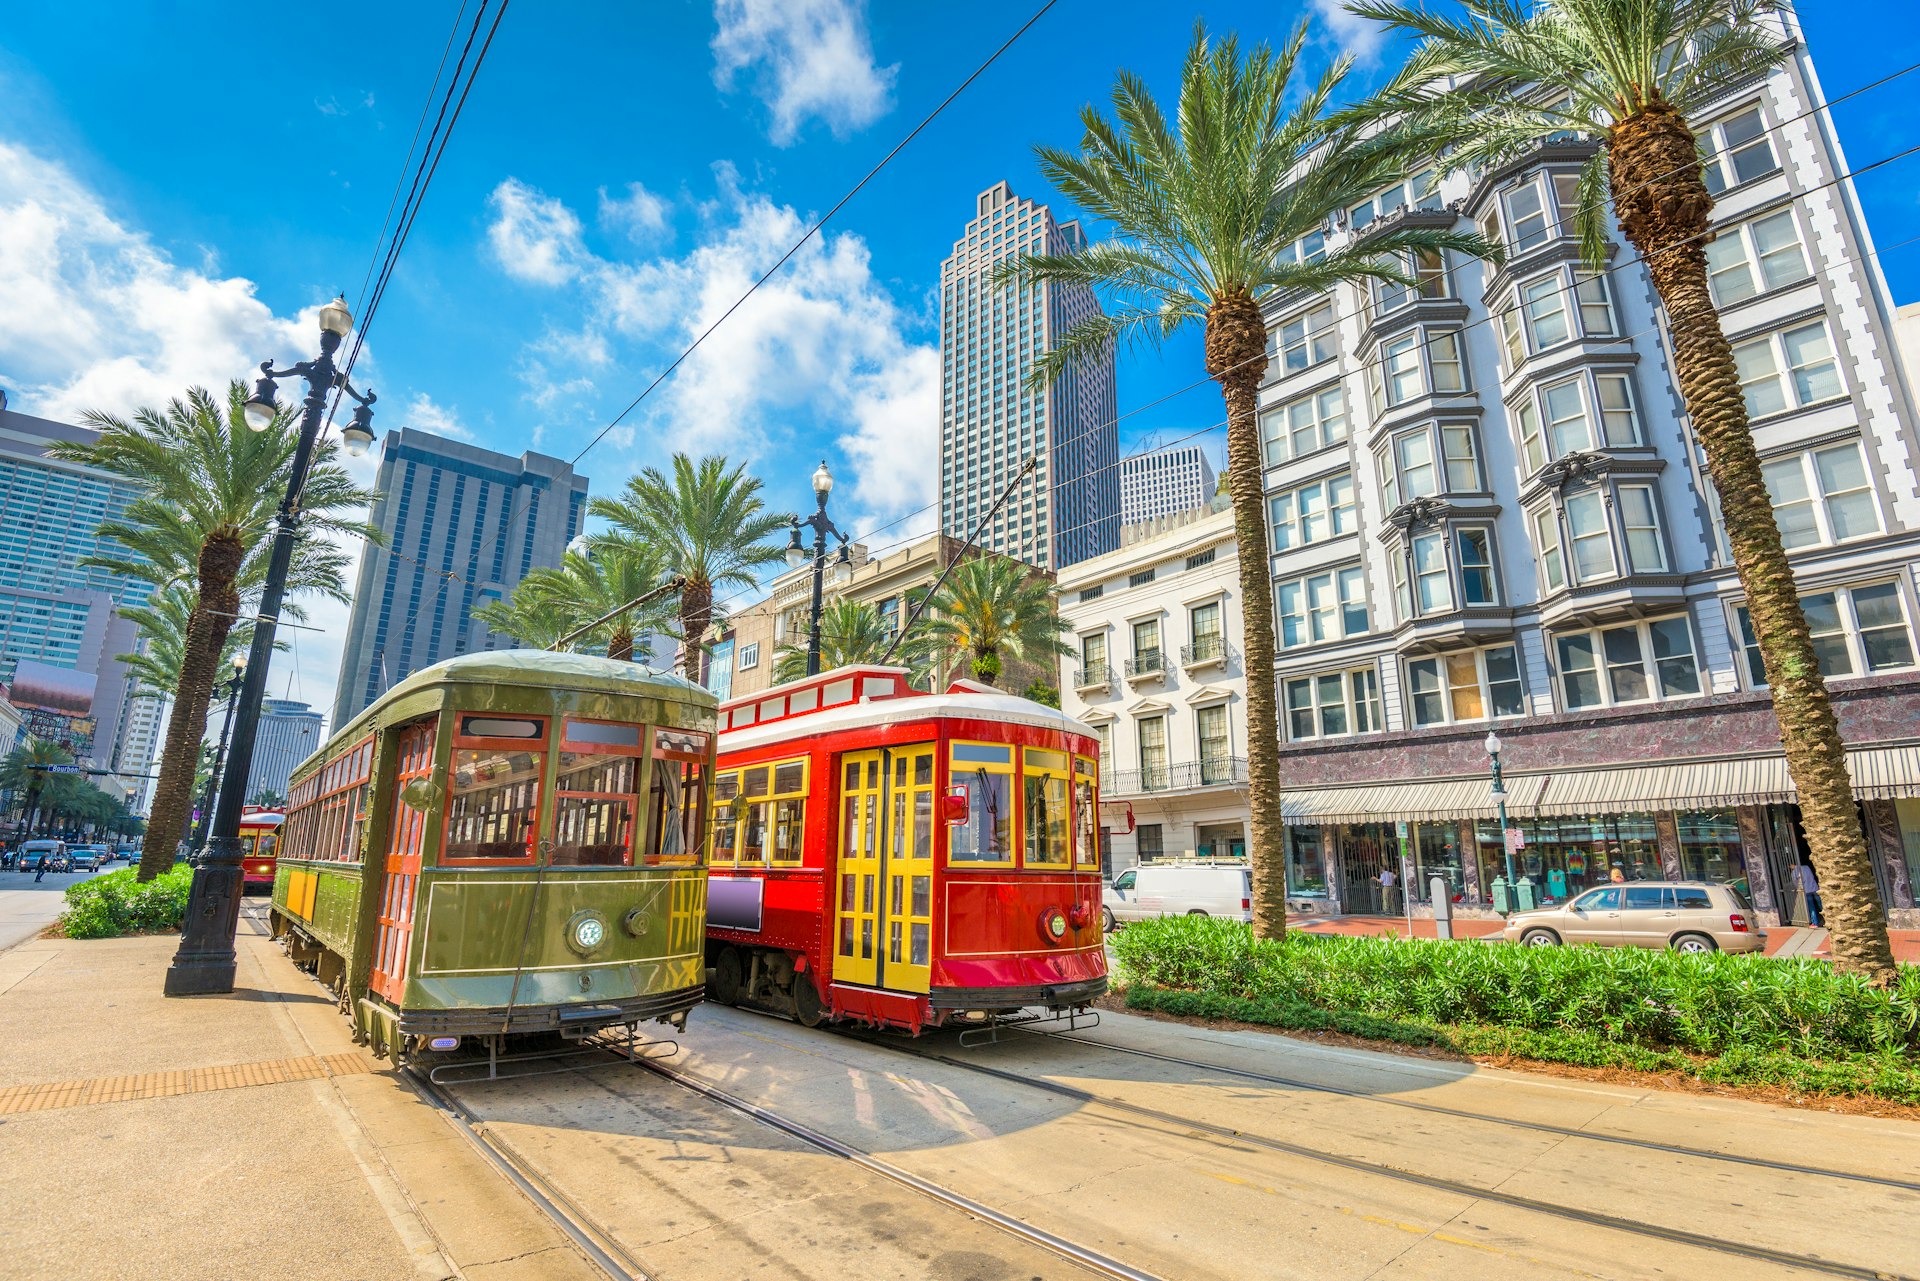 Two of New Orleans' iconic street cars backed by the glass skyscrapers of the city's Central Business District